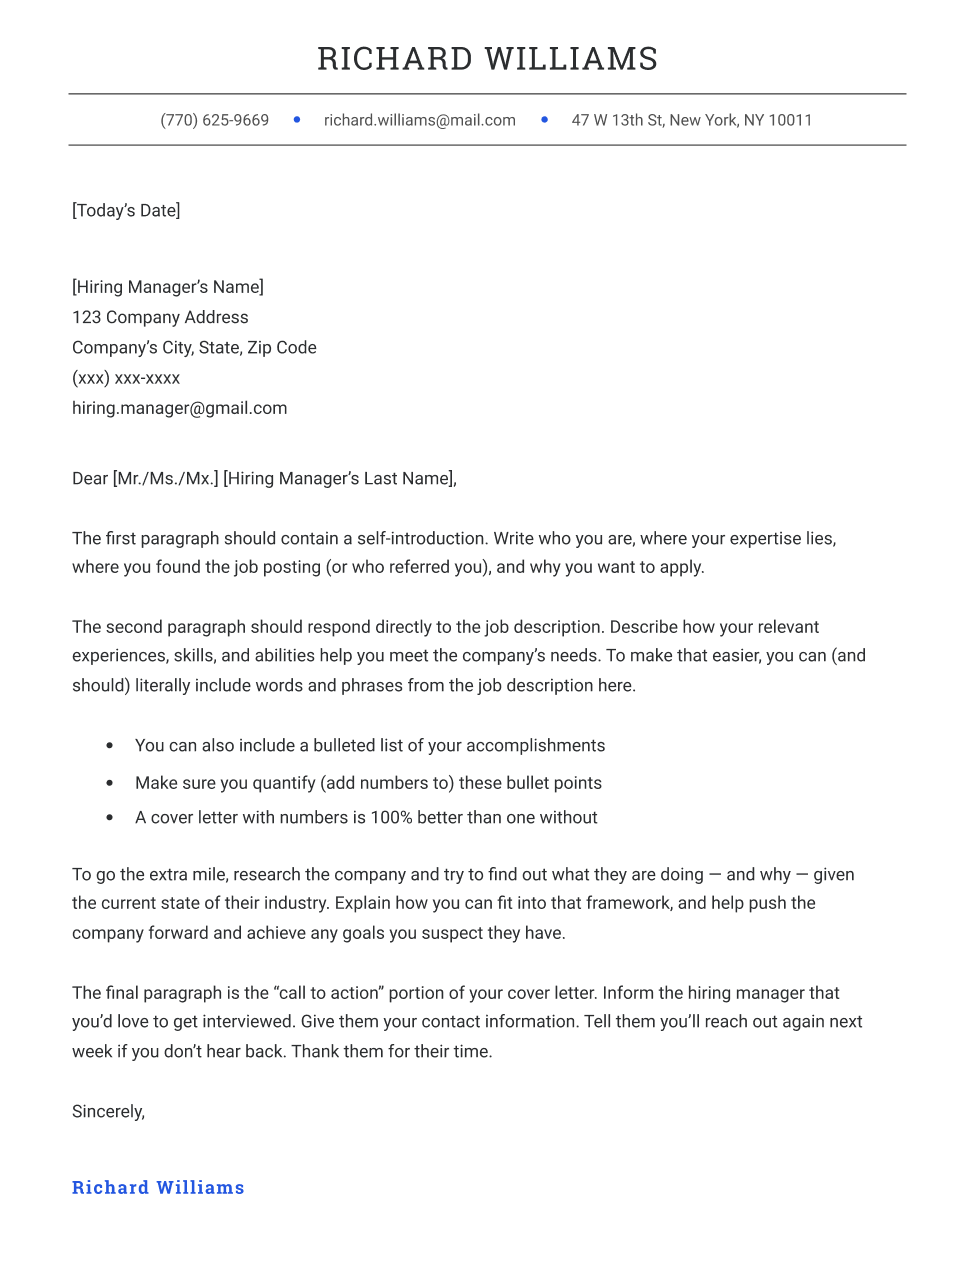 Elegant cover letter template in blue, featuring a simple and formal design.